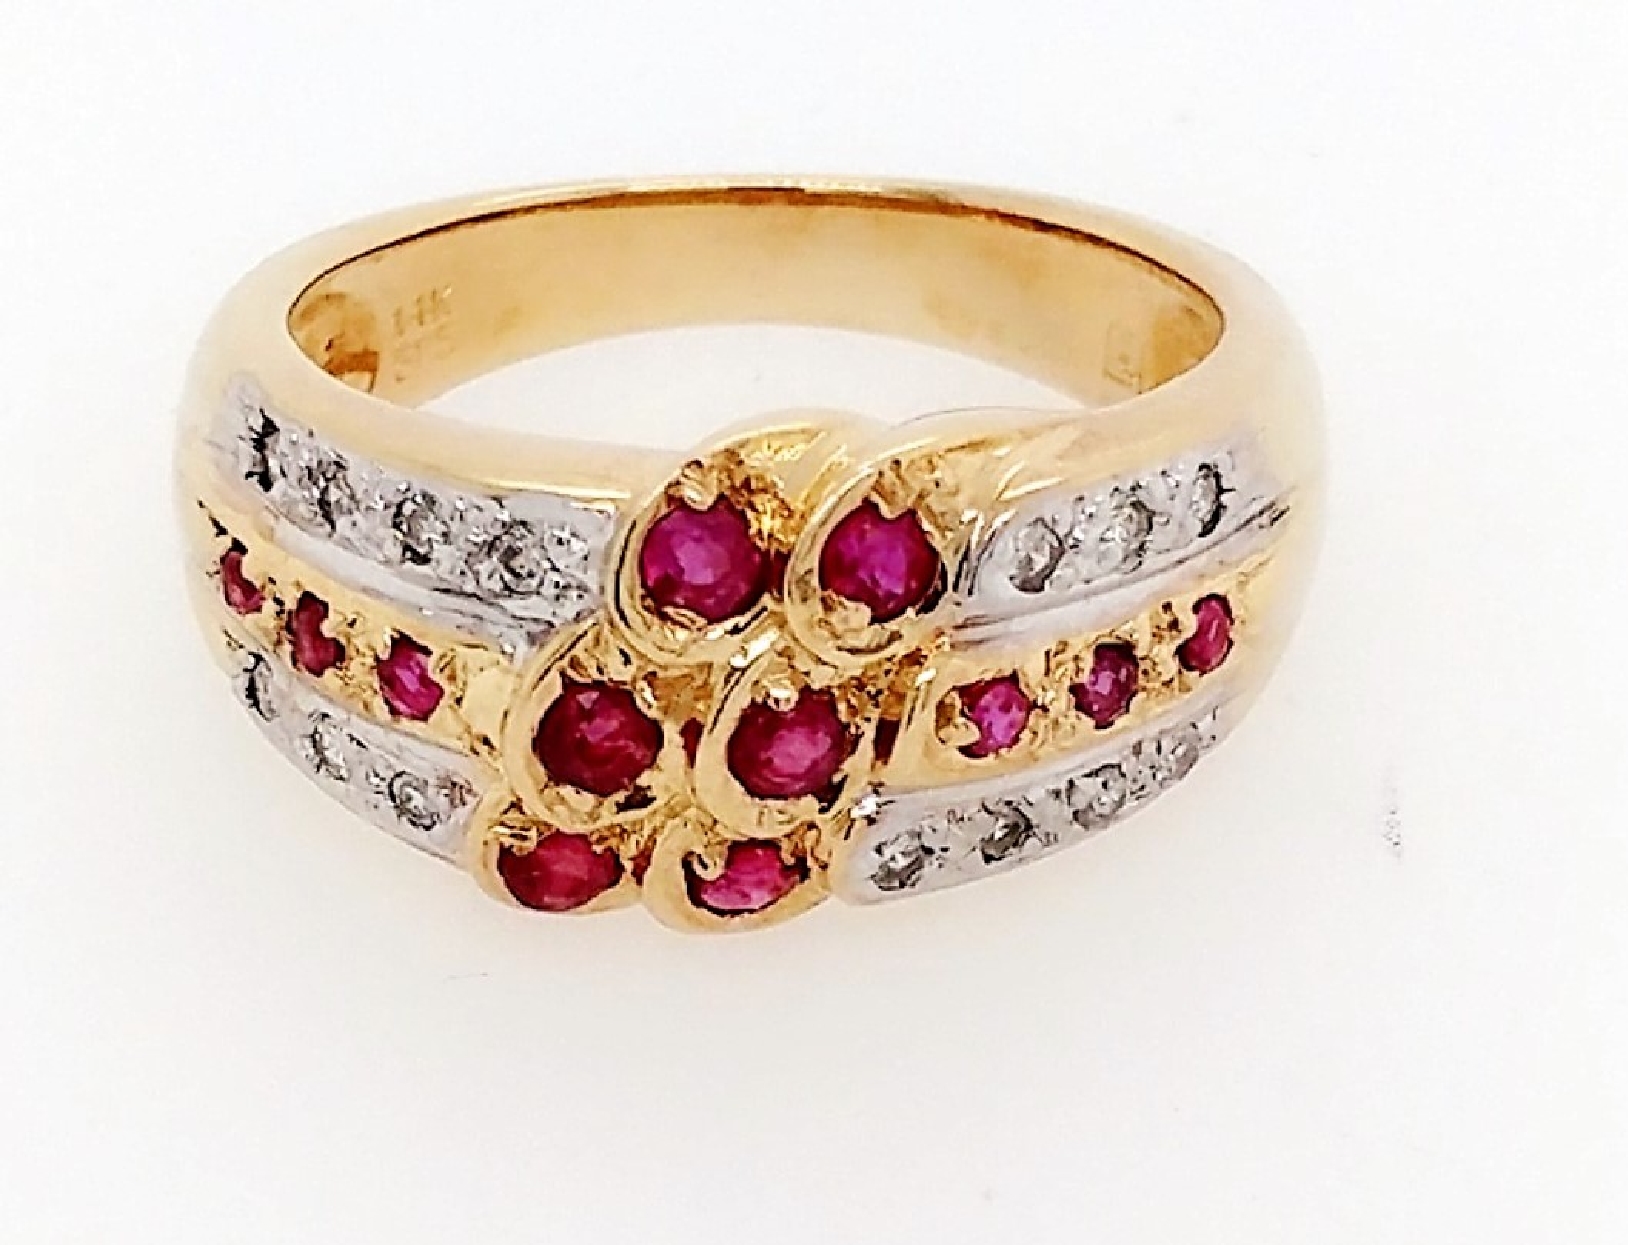 14K yellow gold ring w/ 12 rubies and 14 dias. White gold accents. Sz. 6.5.